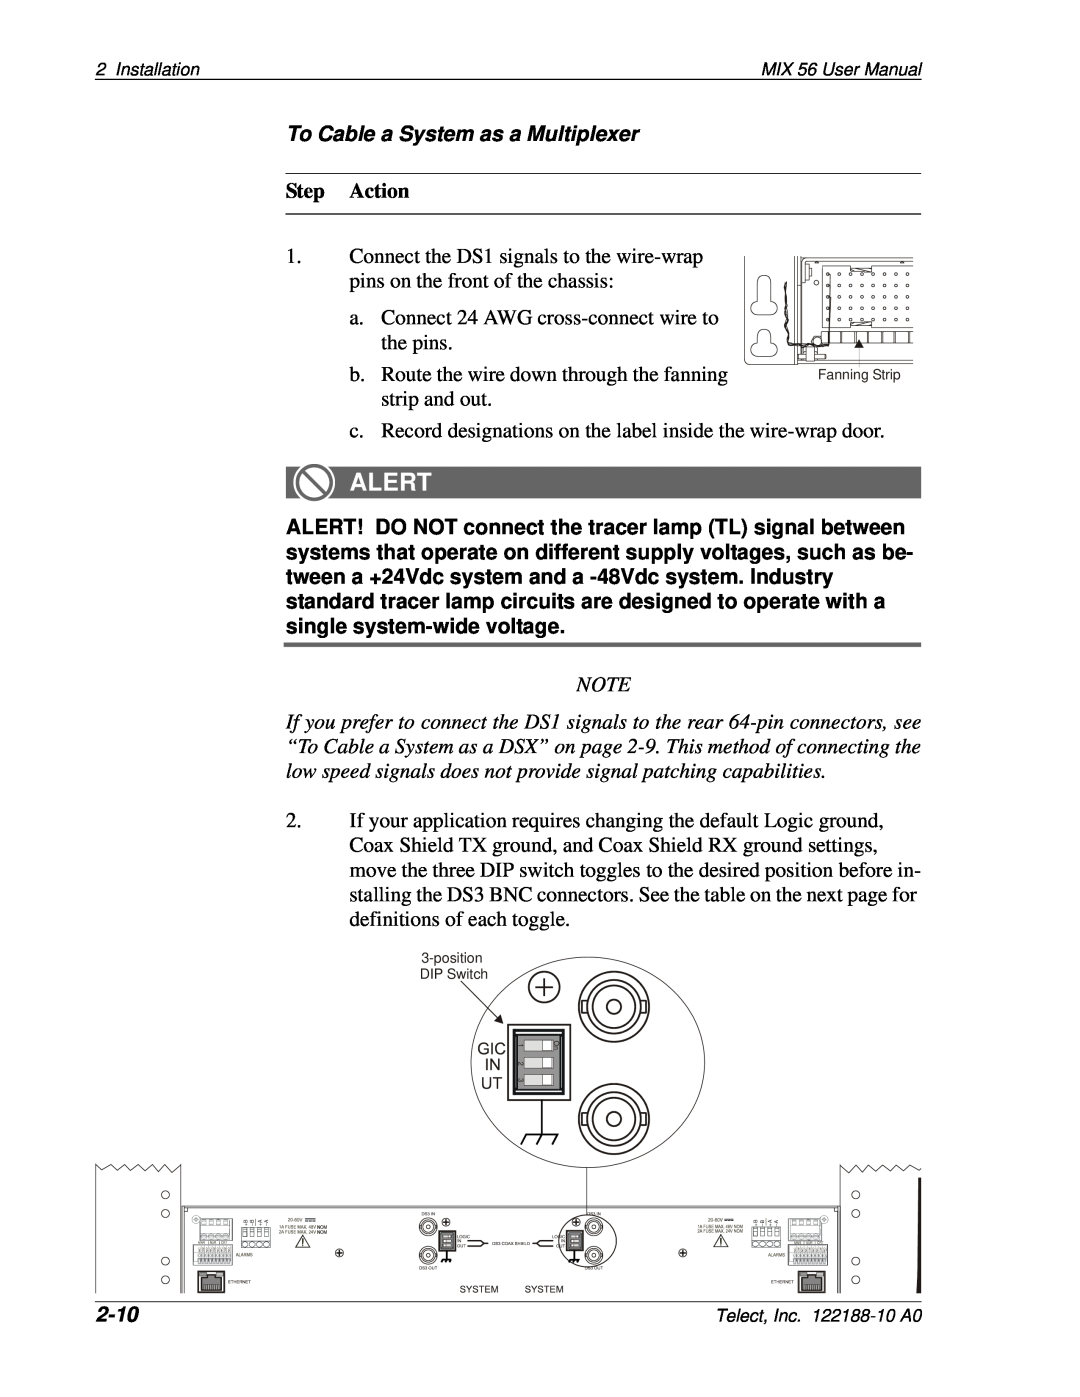 Telect MIX 56 user manual To Cable a System as a Multiplexer, Alert, Step Action, 2-10 